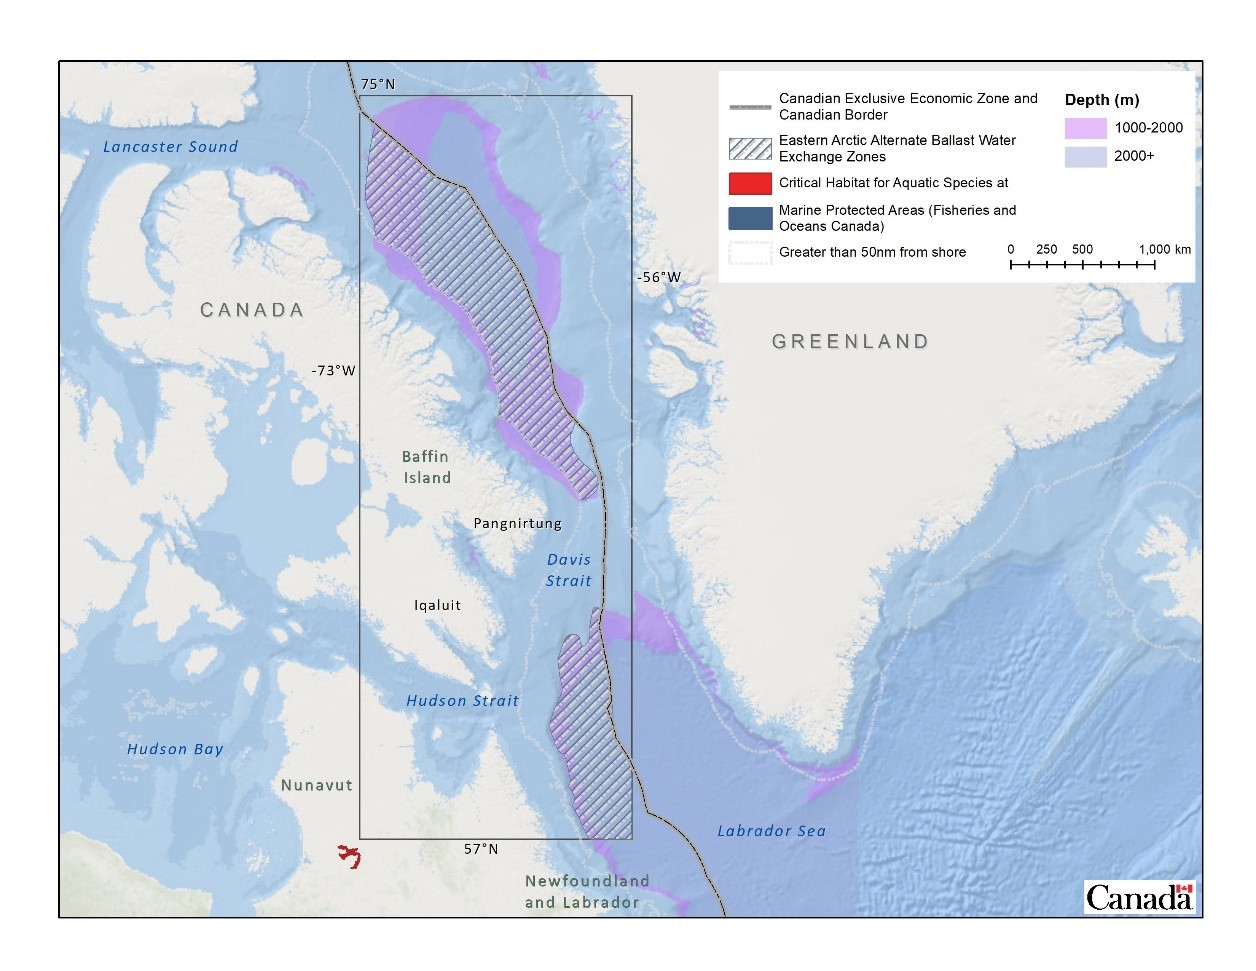 Figure 4. Designated Alternate Ballast Water Exchange Areas in the Canadian Eastern Arctic.